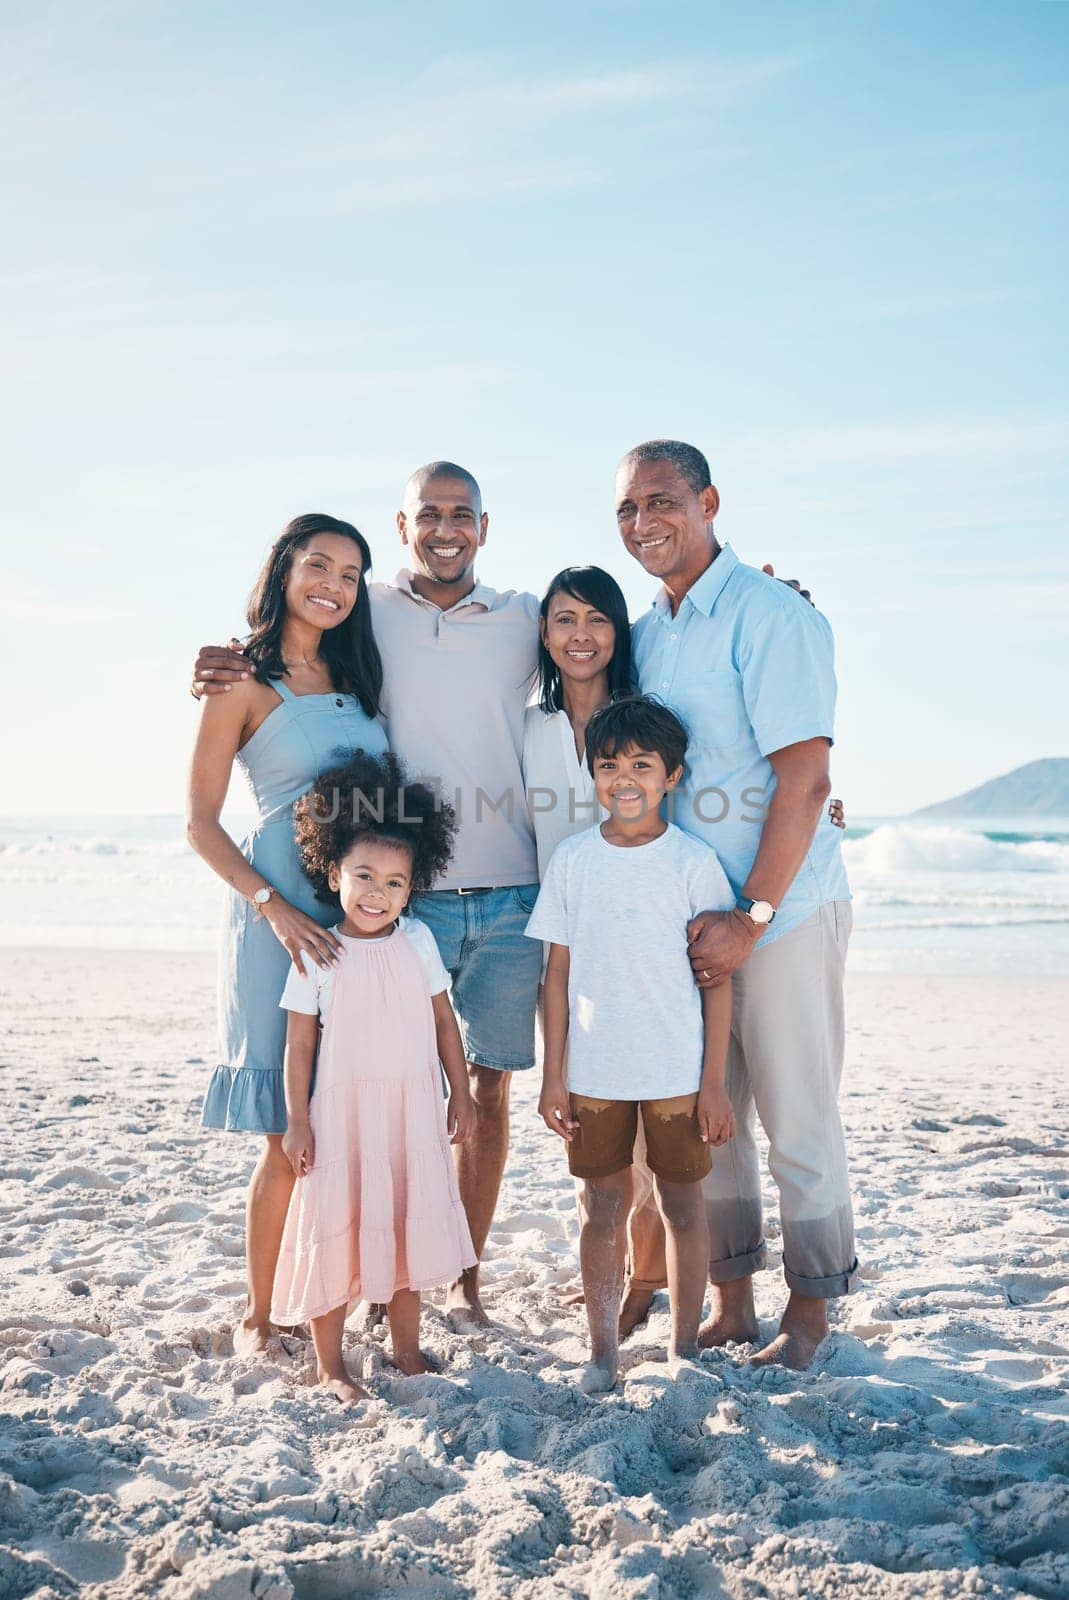 Beach, happy and portrait of a big family on a vacation, adventure or weekend trip for summer. Smile, bonding and children by the ocean with their parents and grandparents on tropical travel holiday